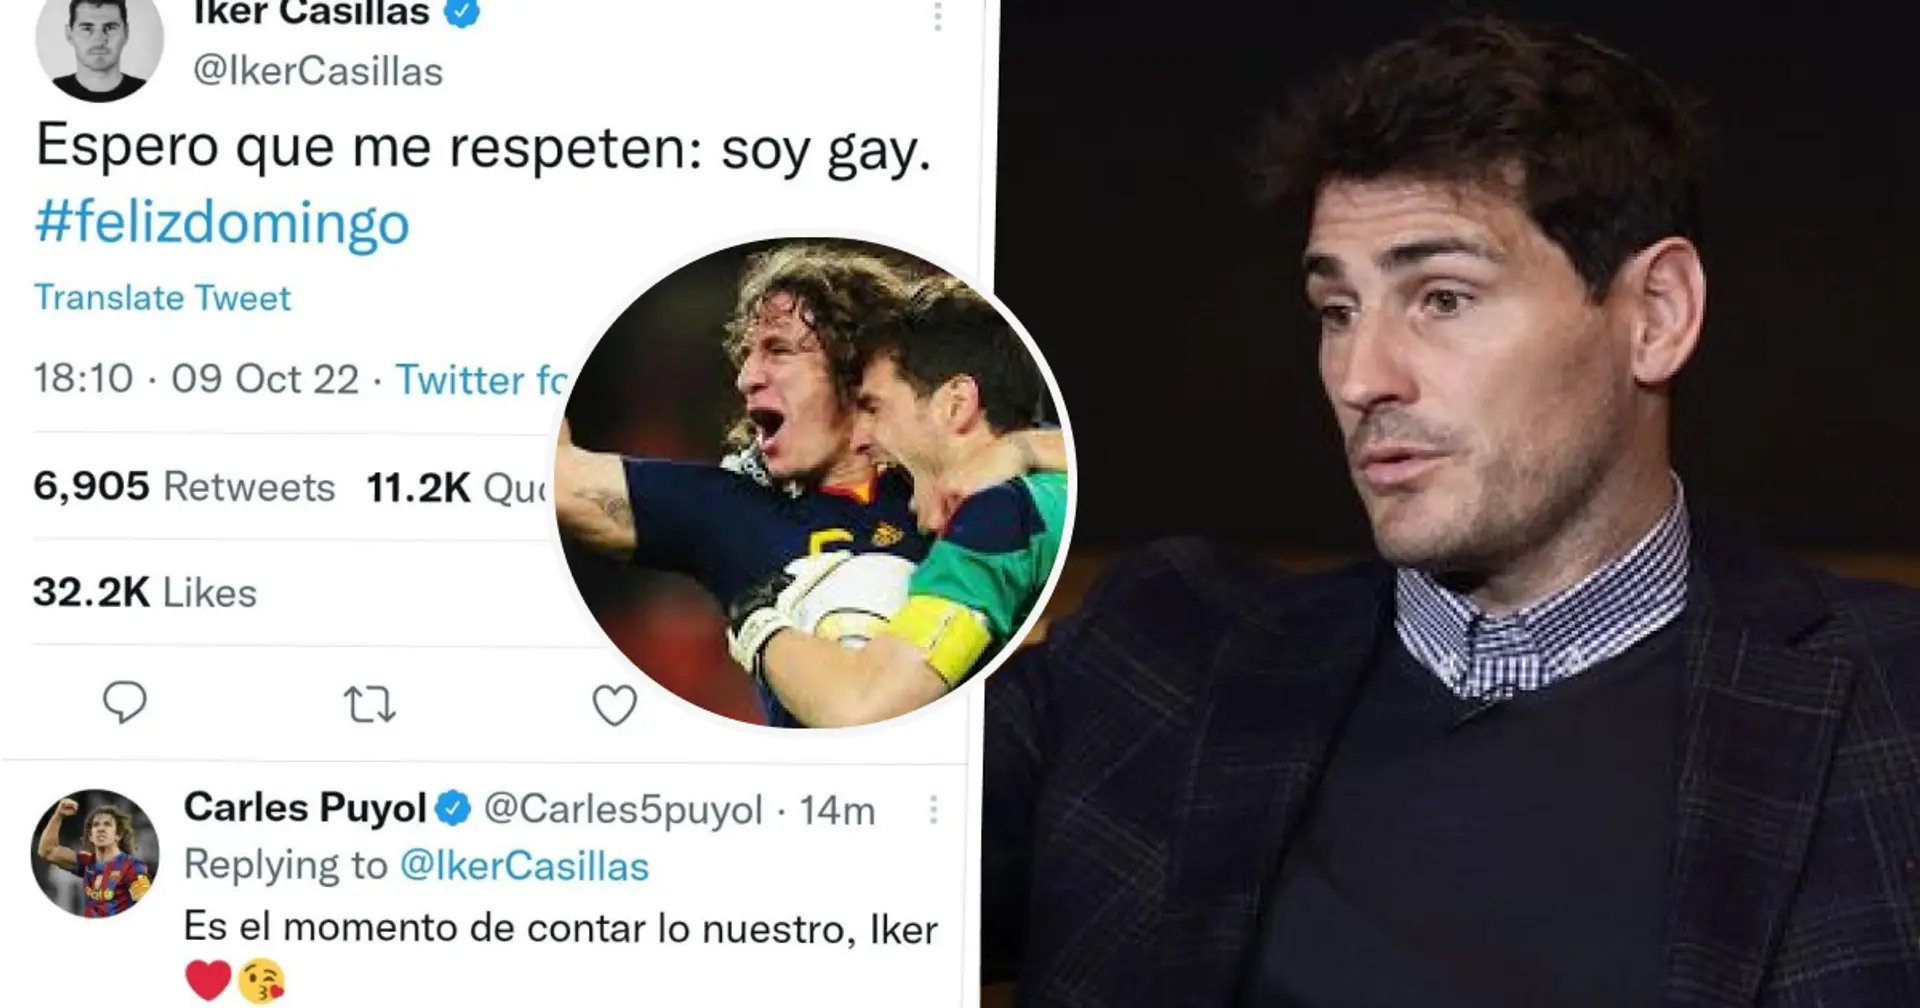 Casillas deletes provocative tweet after being slammed by fans. What happened? Explained.